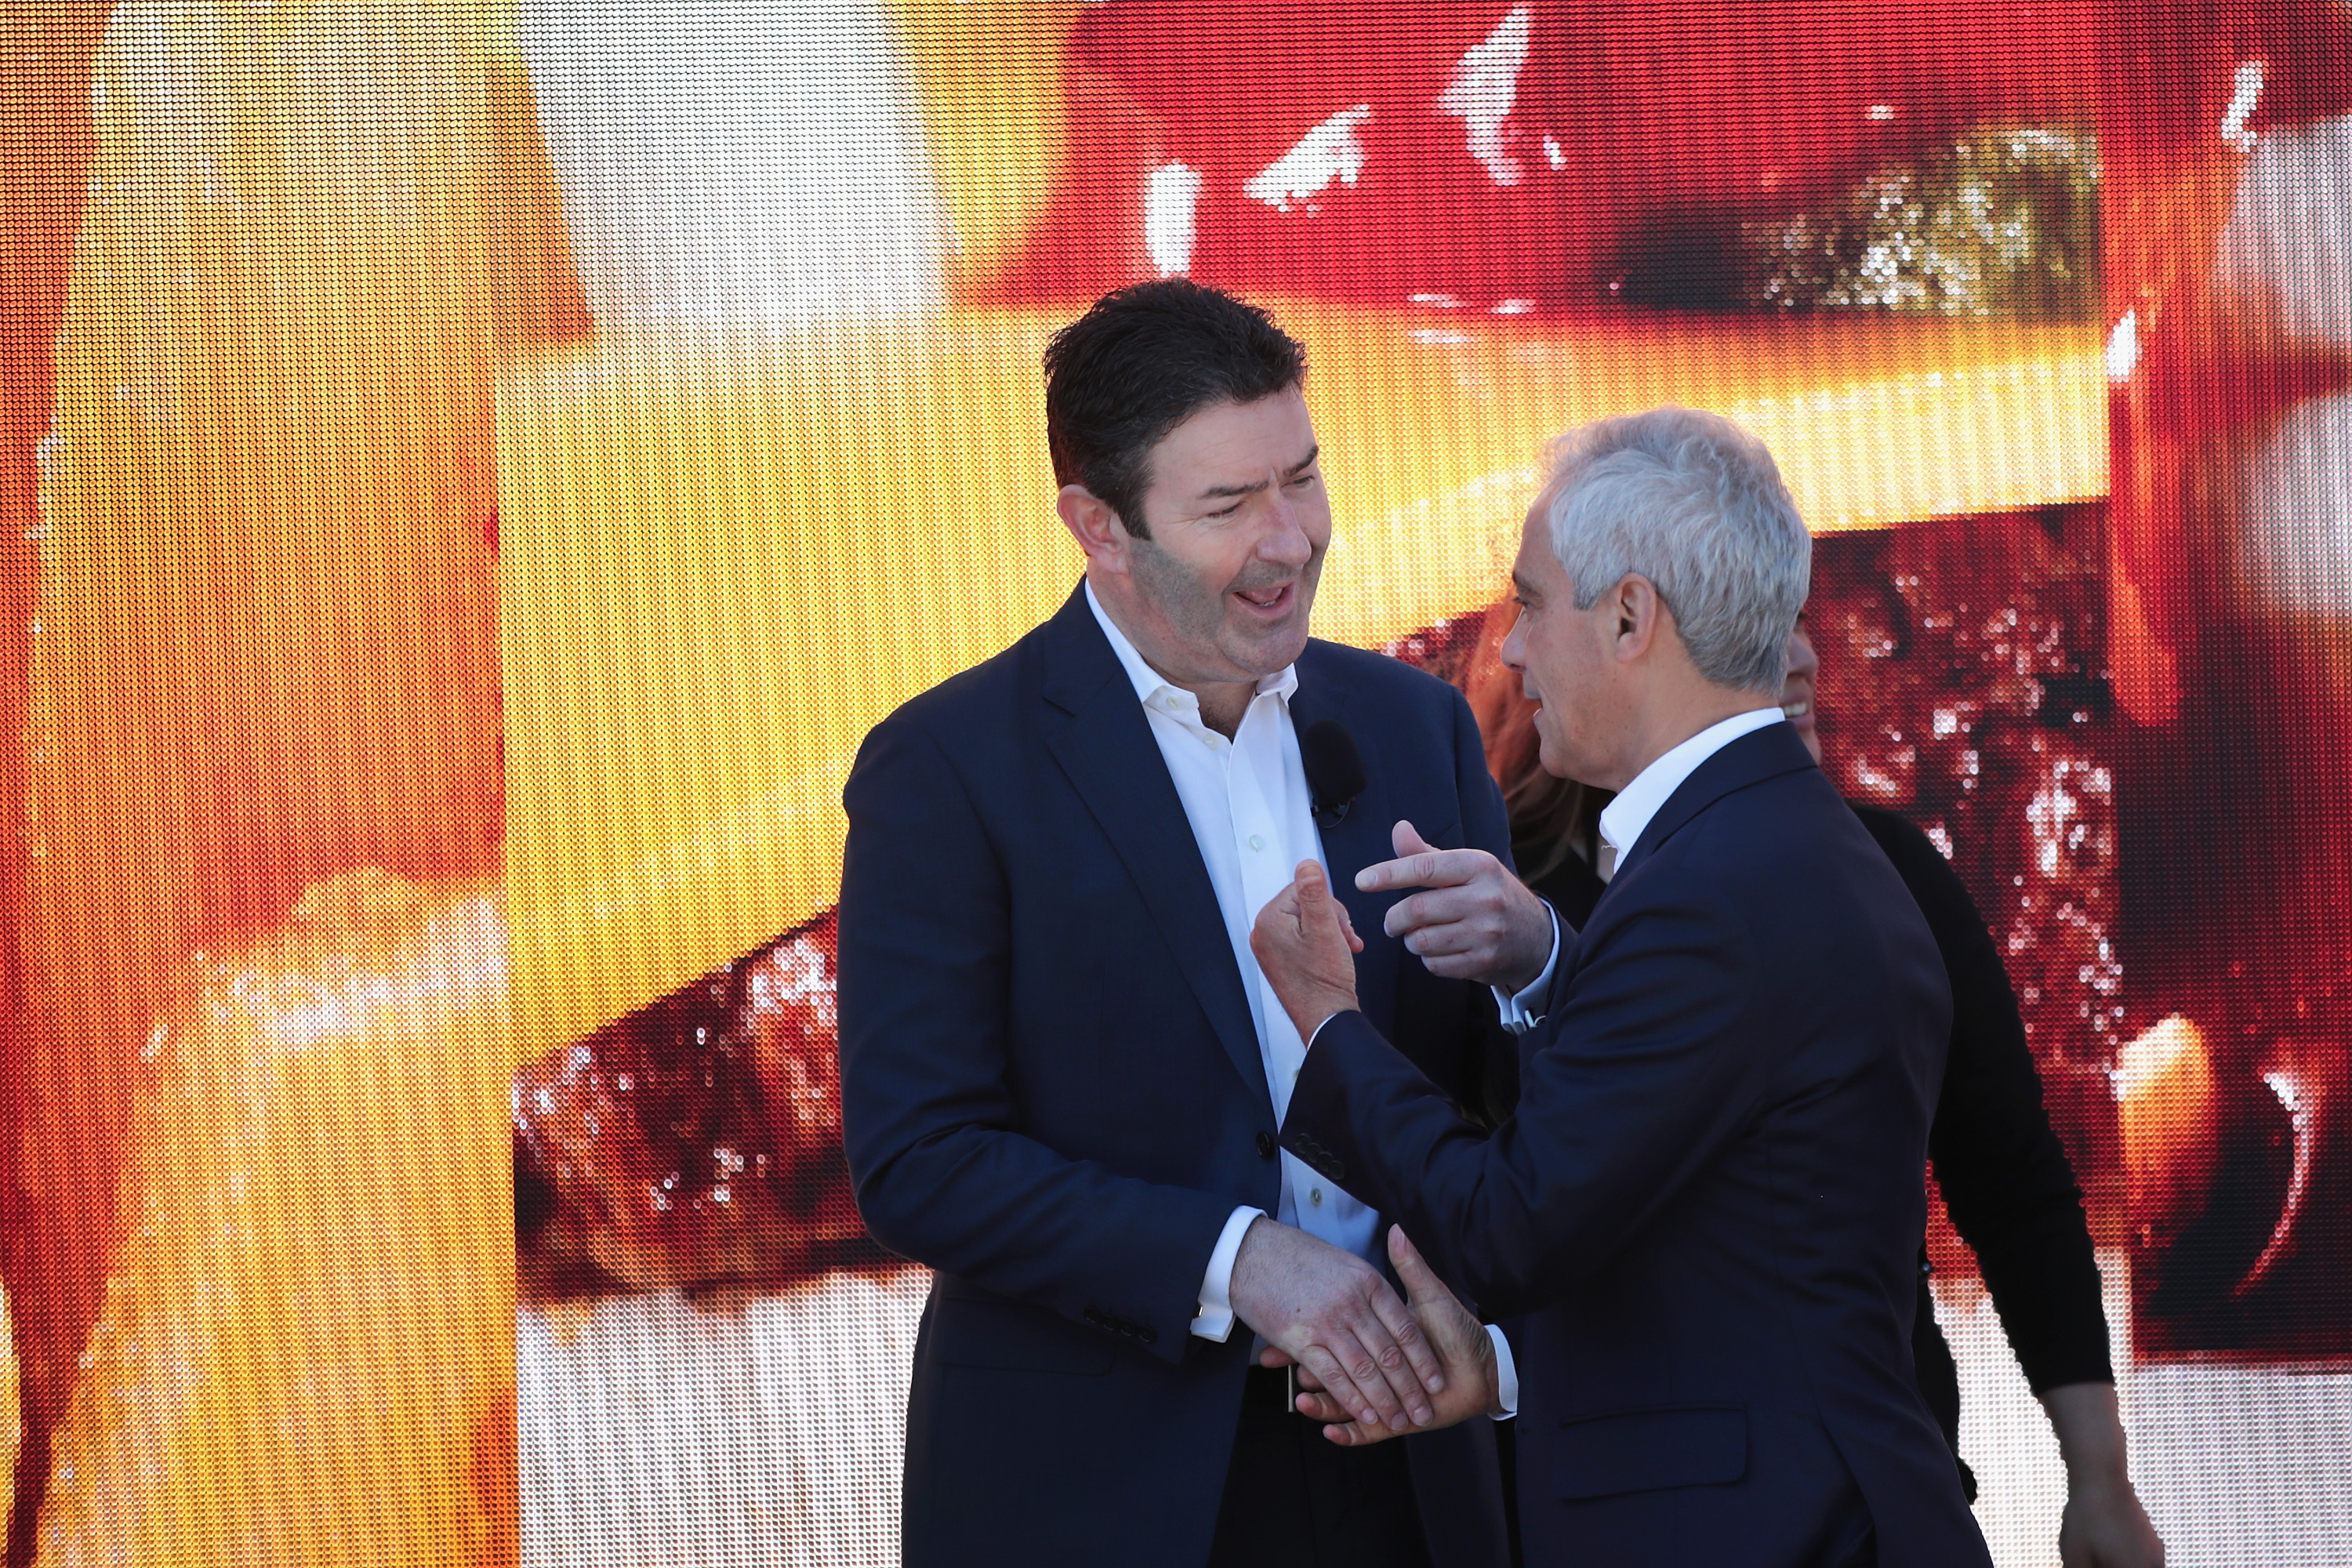 Former McDonald's CEO Steve Easterbrook greets former Chicago Mayor Rahm Emanuel at the unveiling of the company's new corporate headquarters on June 4, 2018 in Chicago, Illinois. (Scott Olson/Getty Images)